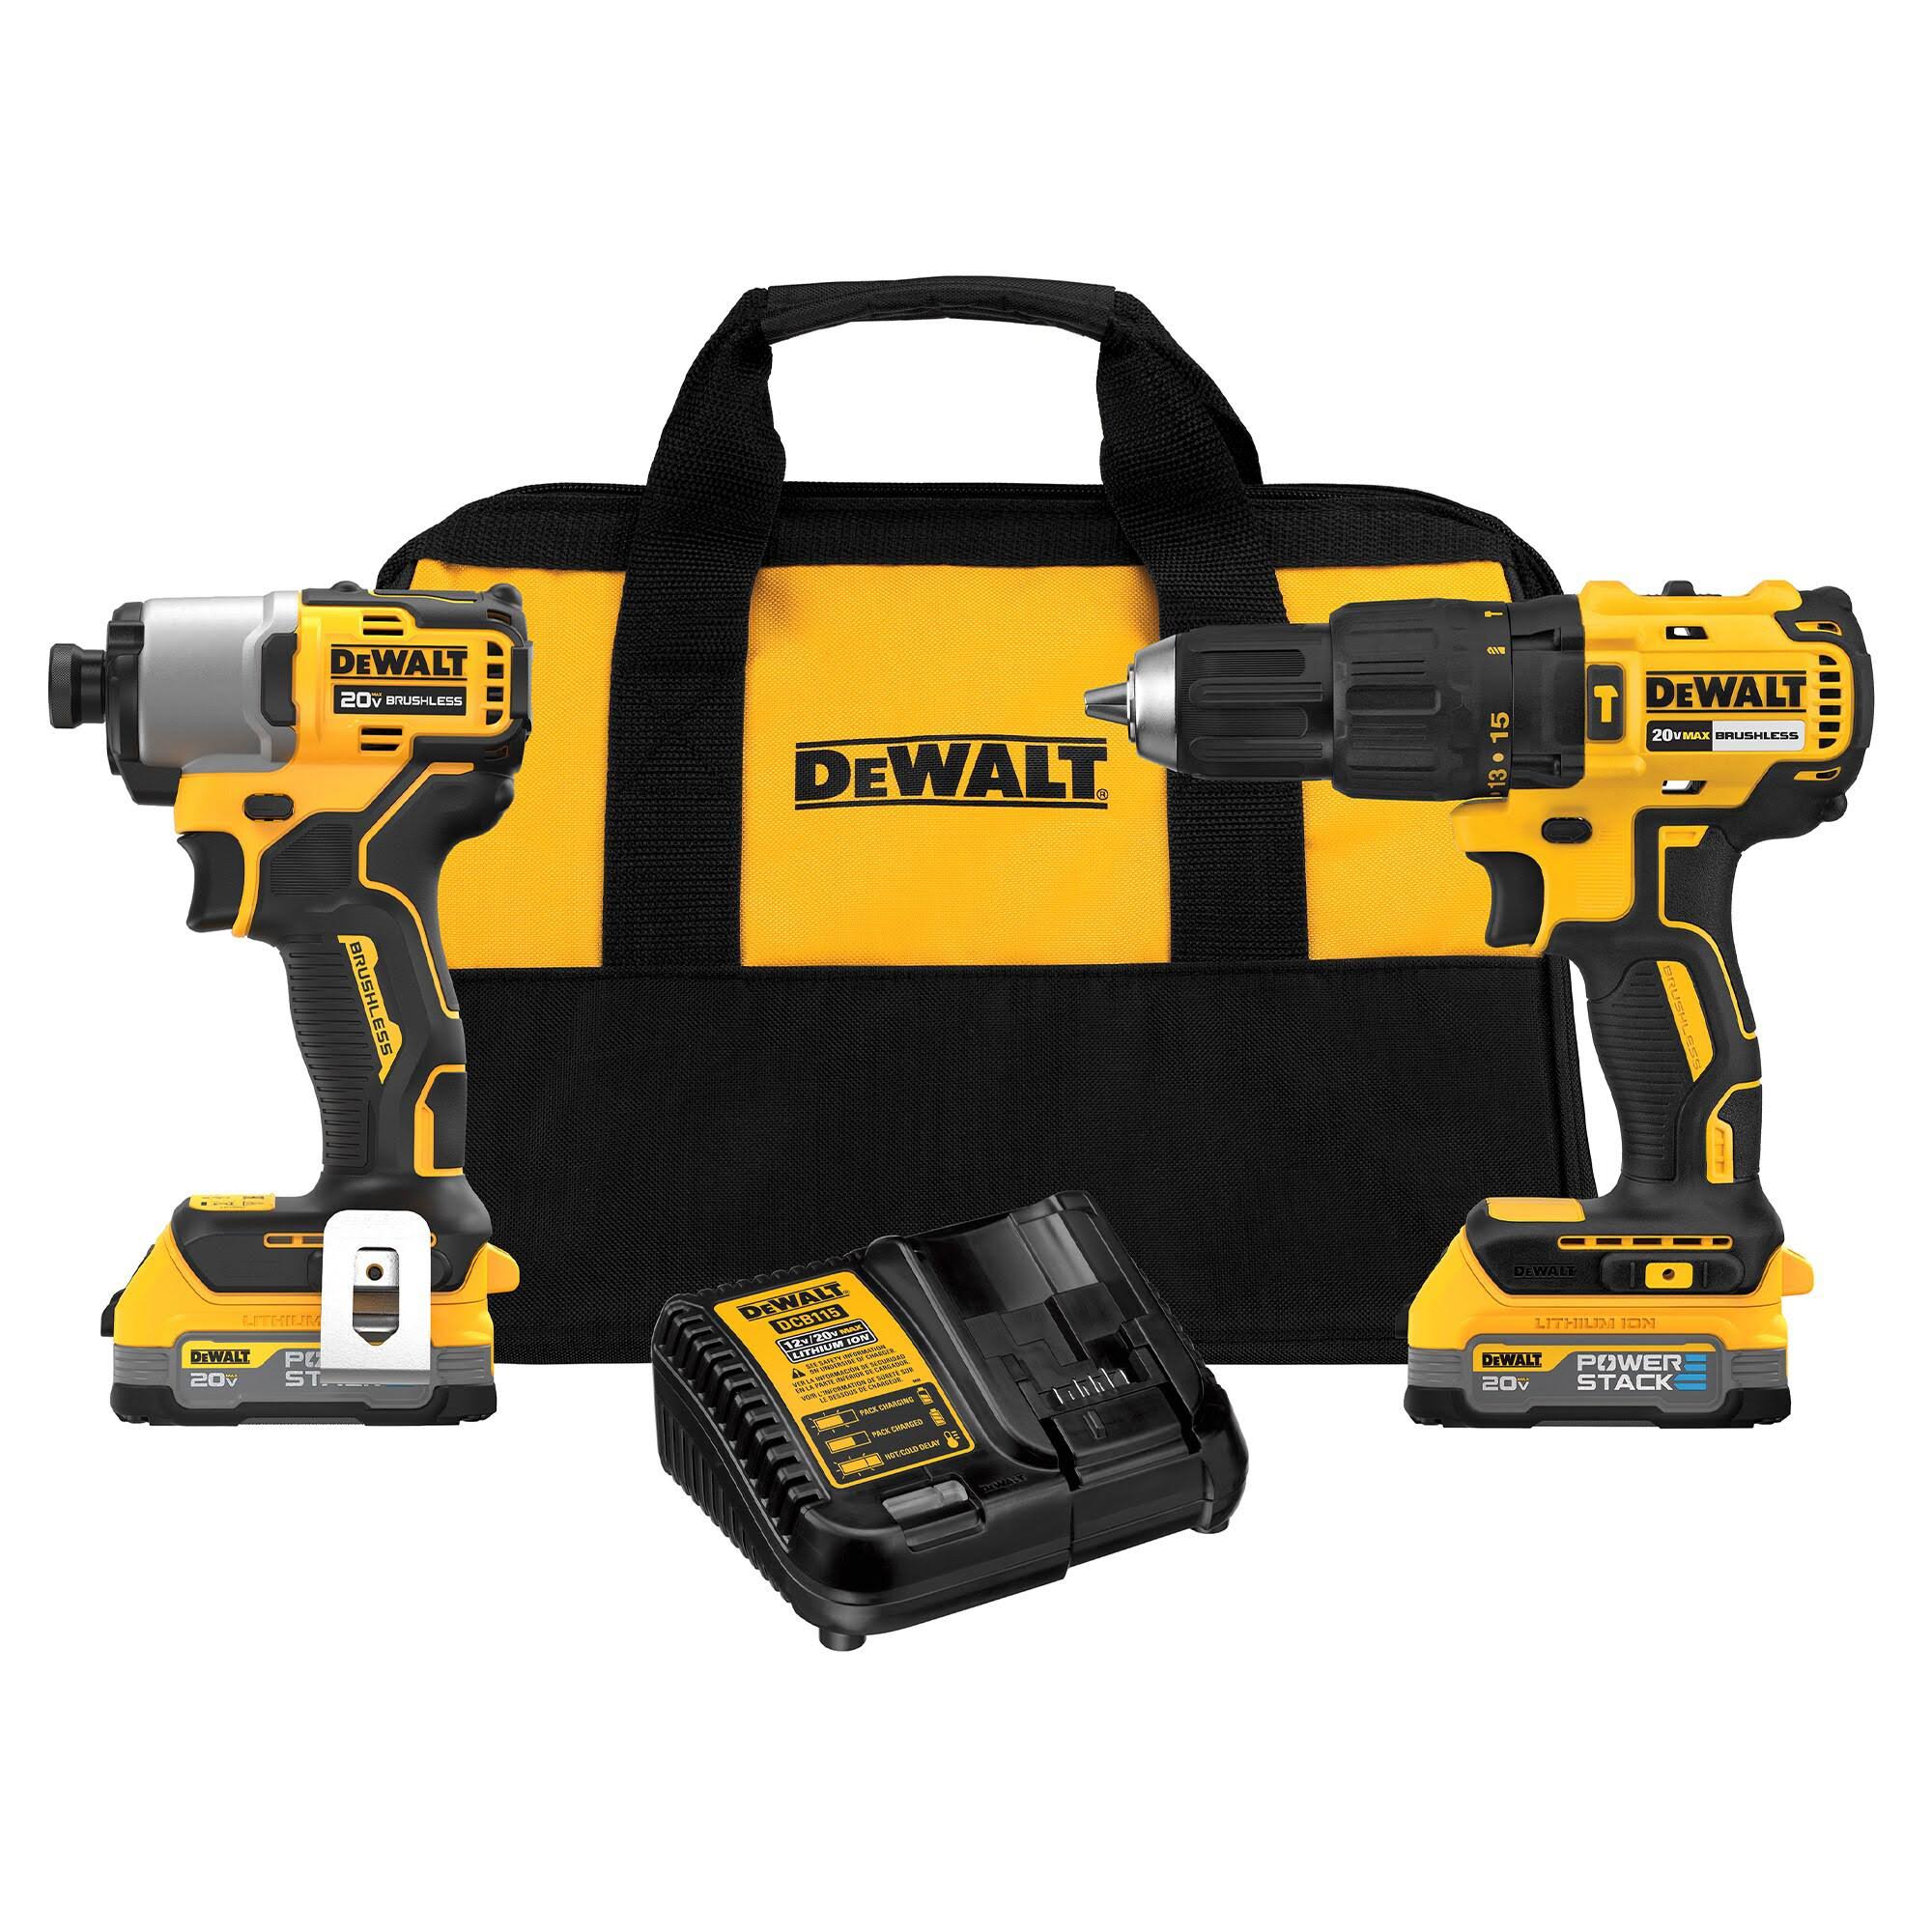 DeWalt DCK276E2 20V Max Brushless Lithium-Ion Cordless Hammer Drill and Impact Driver Combo Kit with Compact Batteries